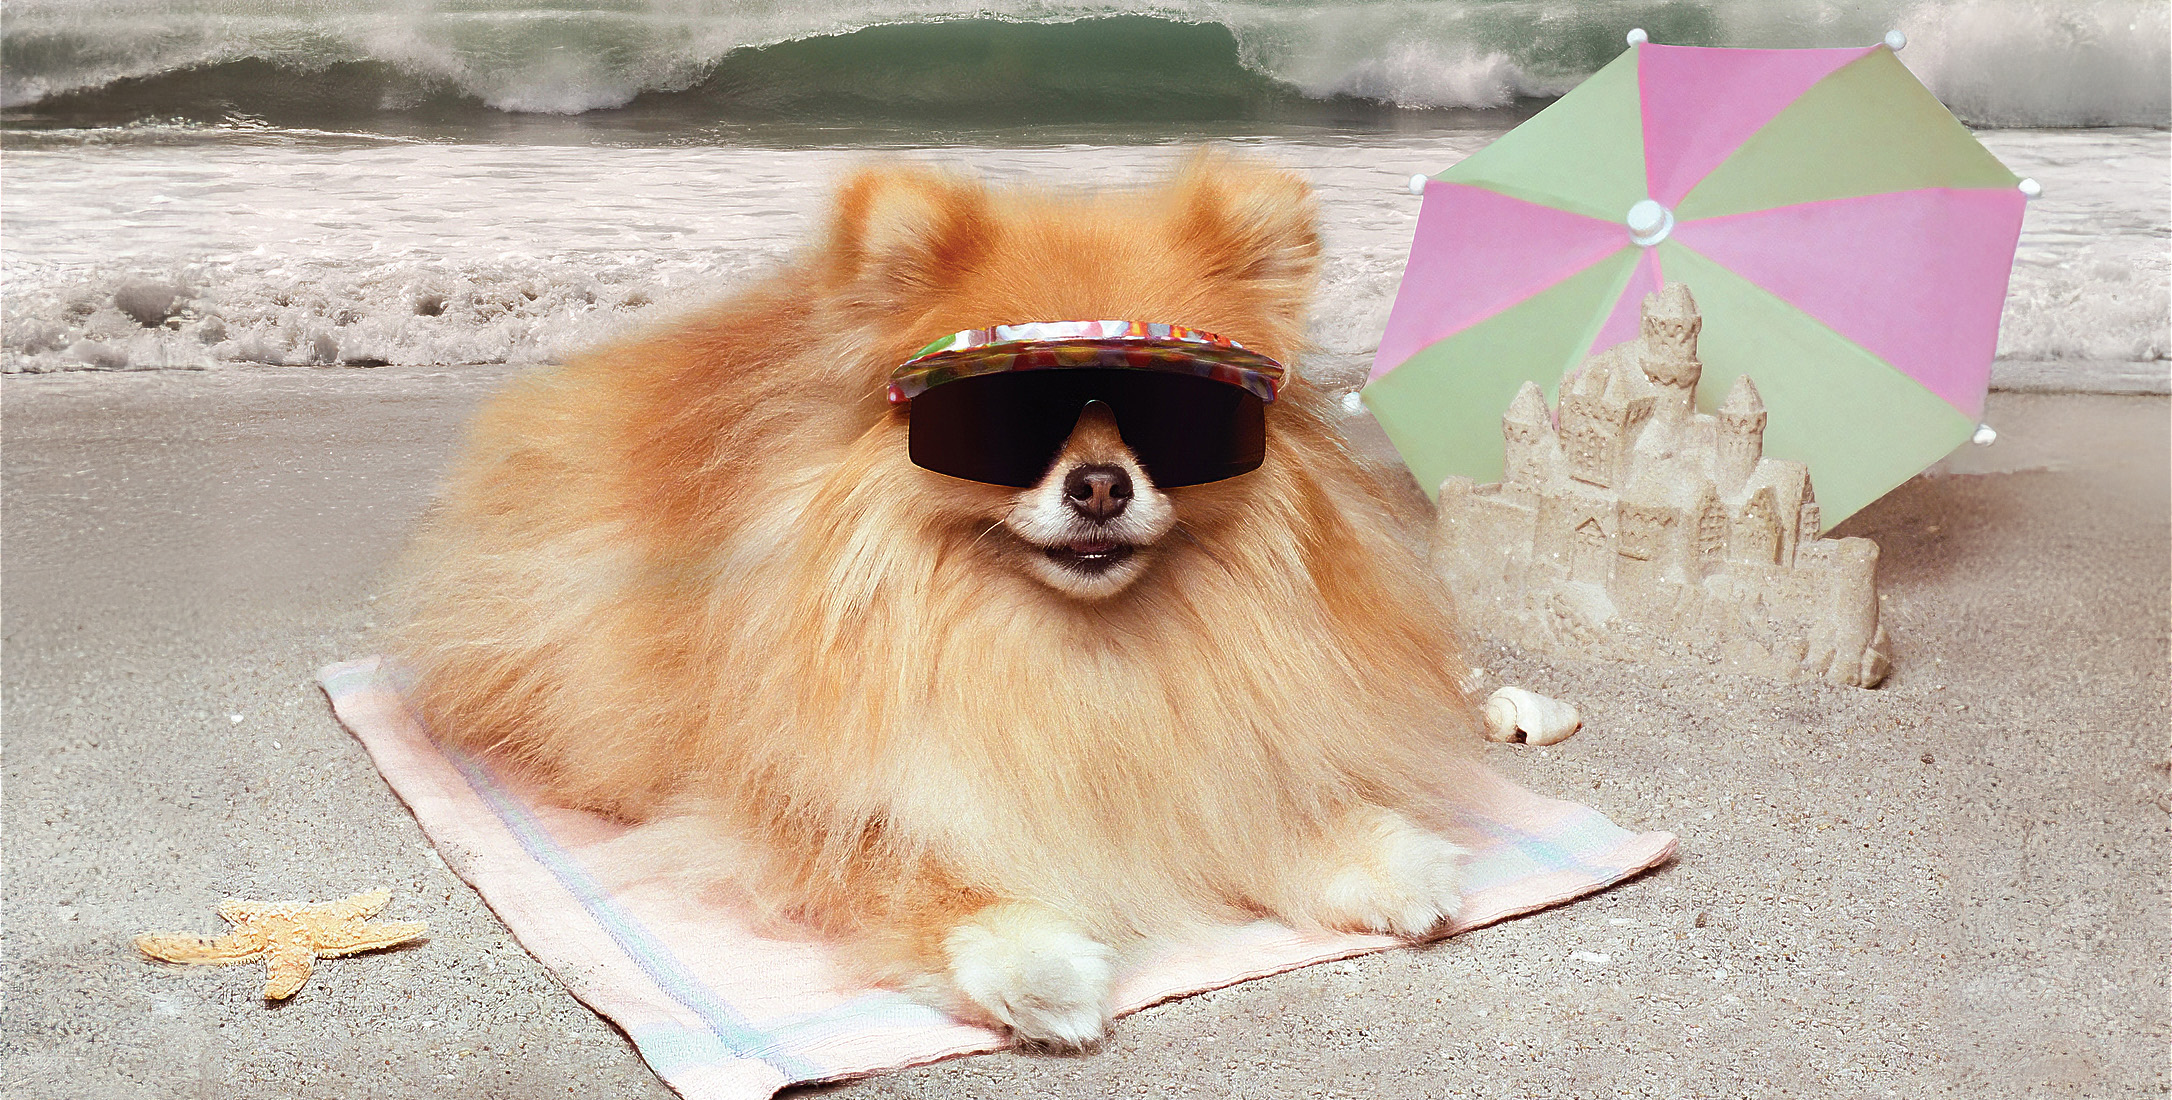 pomeranian dog wearing sunglasses lying on a towel at the beach with sandcastle umbrella and waves in the background; summer safety tips